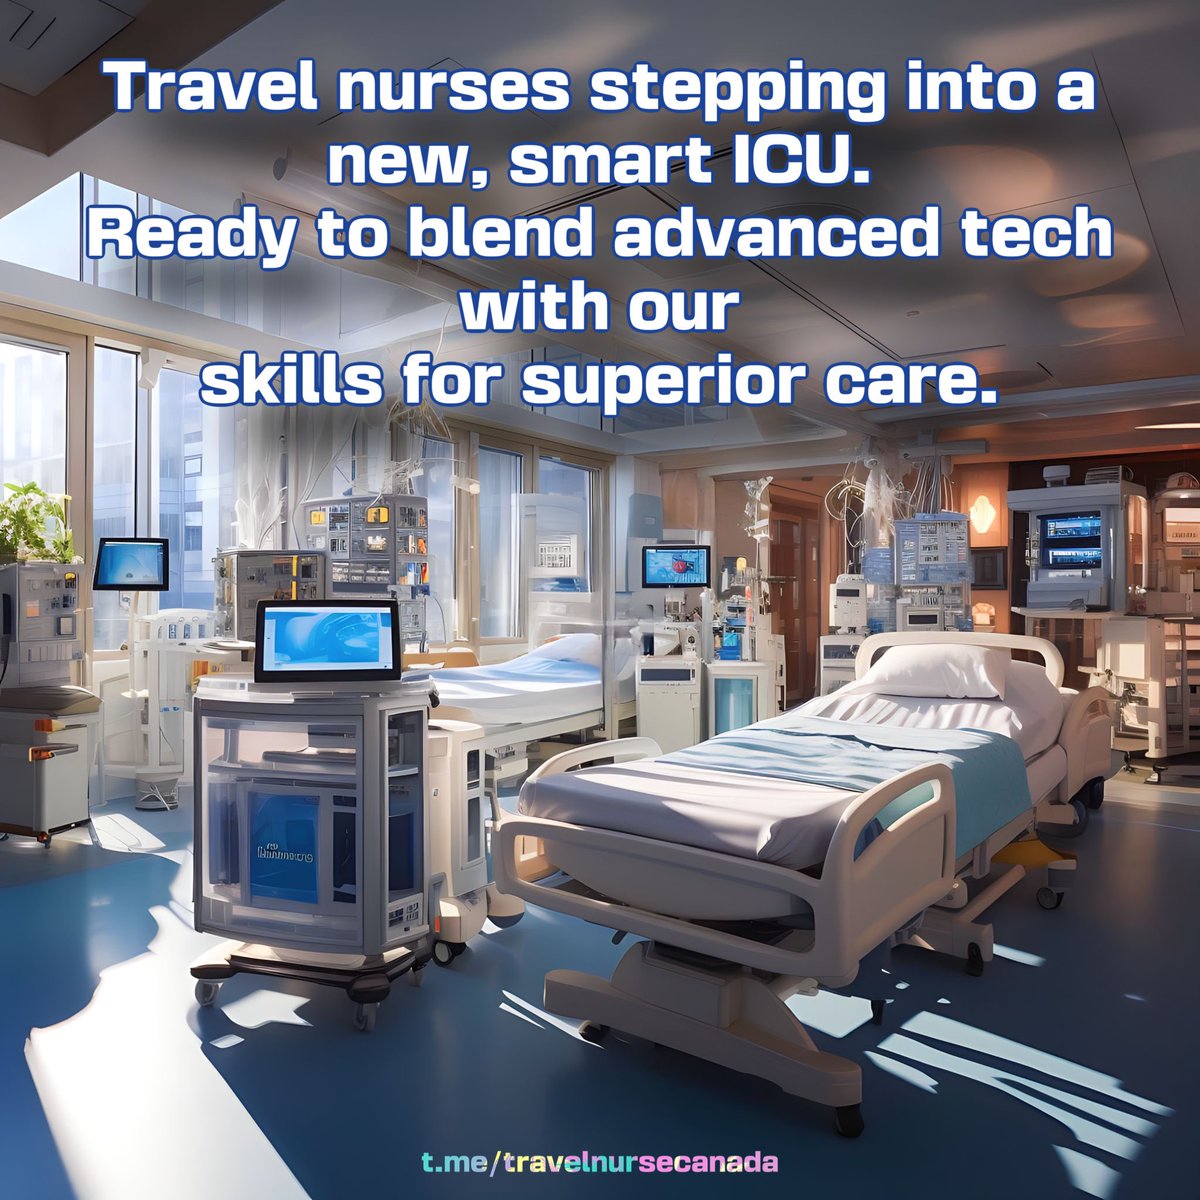 🌍👩‍⚕️👨‍⚕️ We're travel nurses stepping into a new, smart ICU. Ready to blend advanced tech with our skills for superior care. Here's to our new journey! 🎉💪 #TravelNurses #icuinnovation #travelingisfun #travelingpost #travelingrn #travelingnurse #nursetraveler